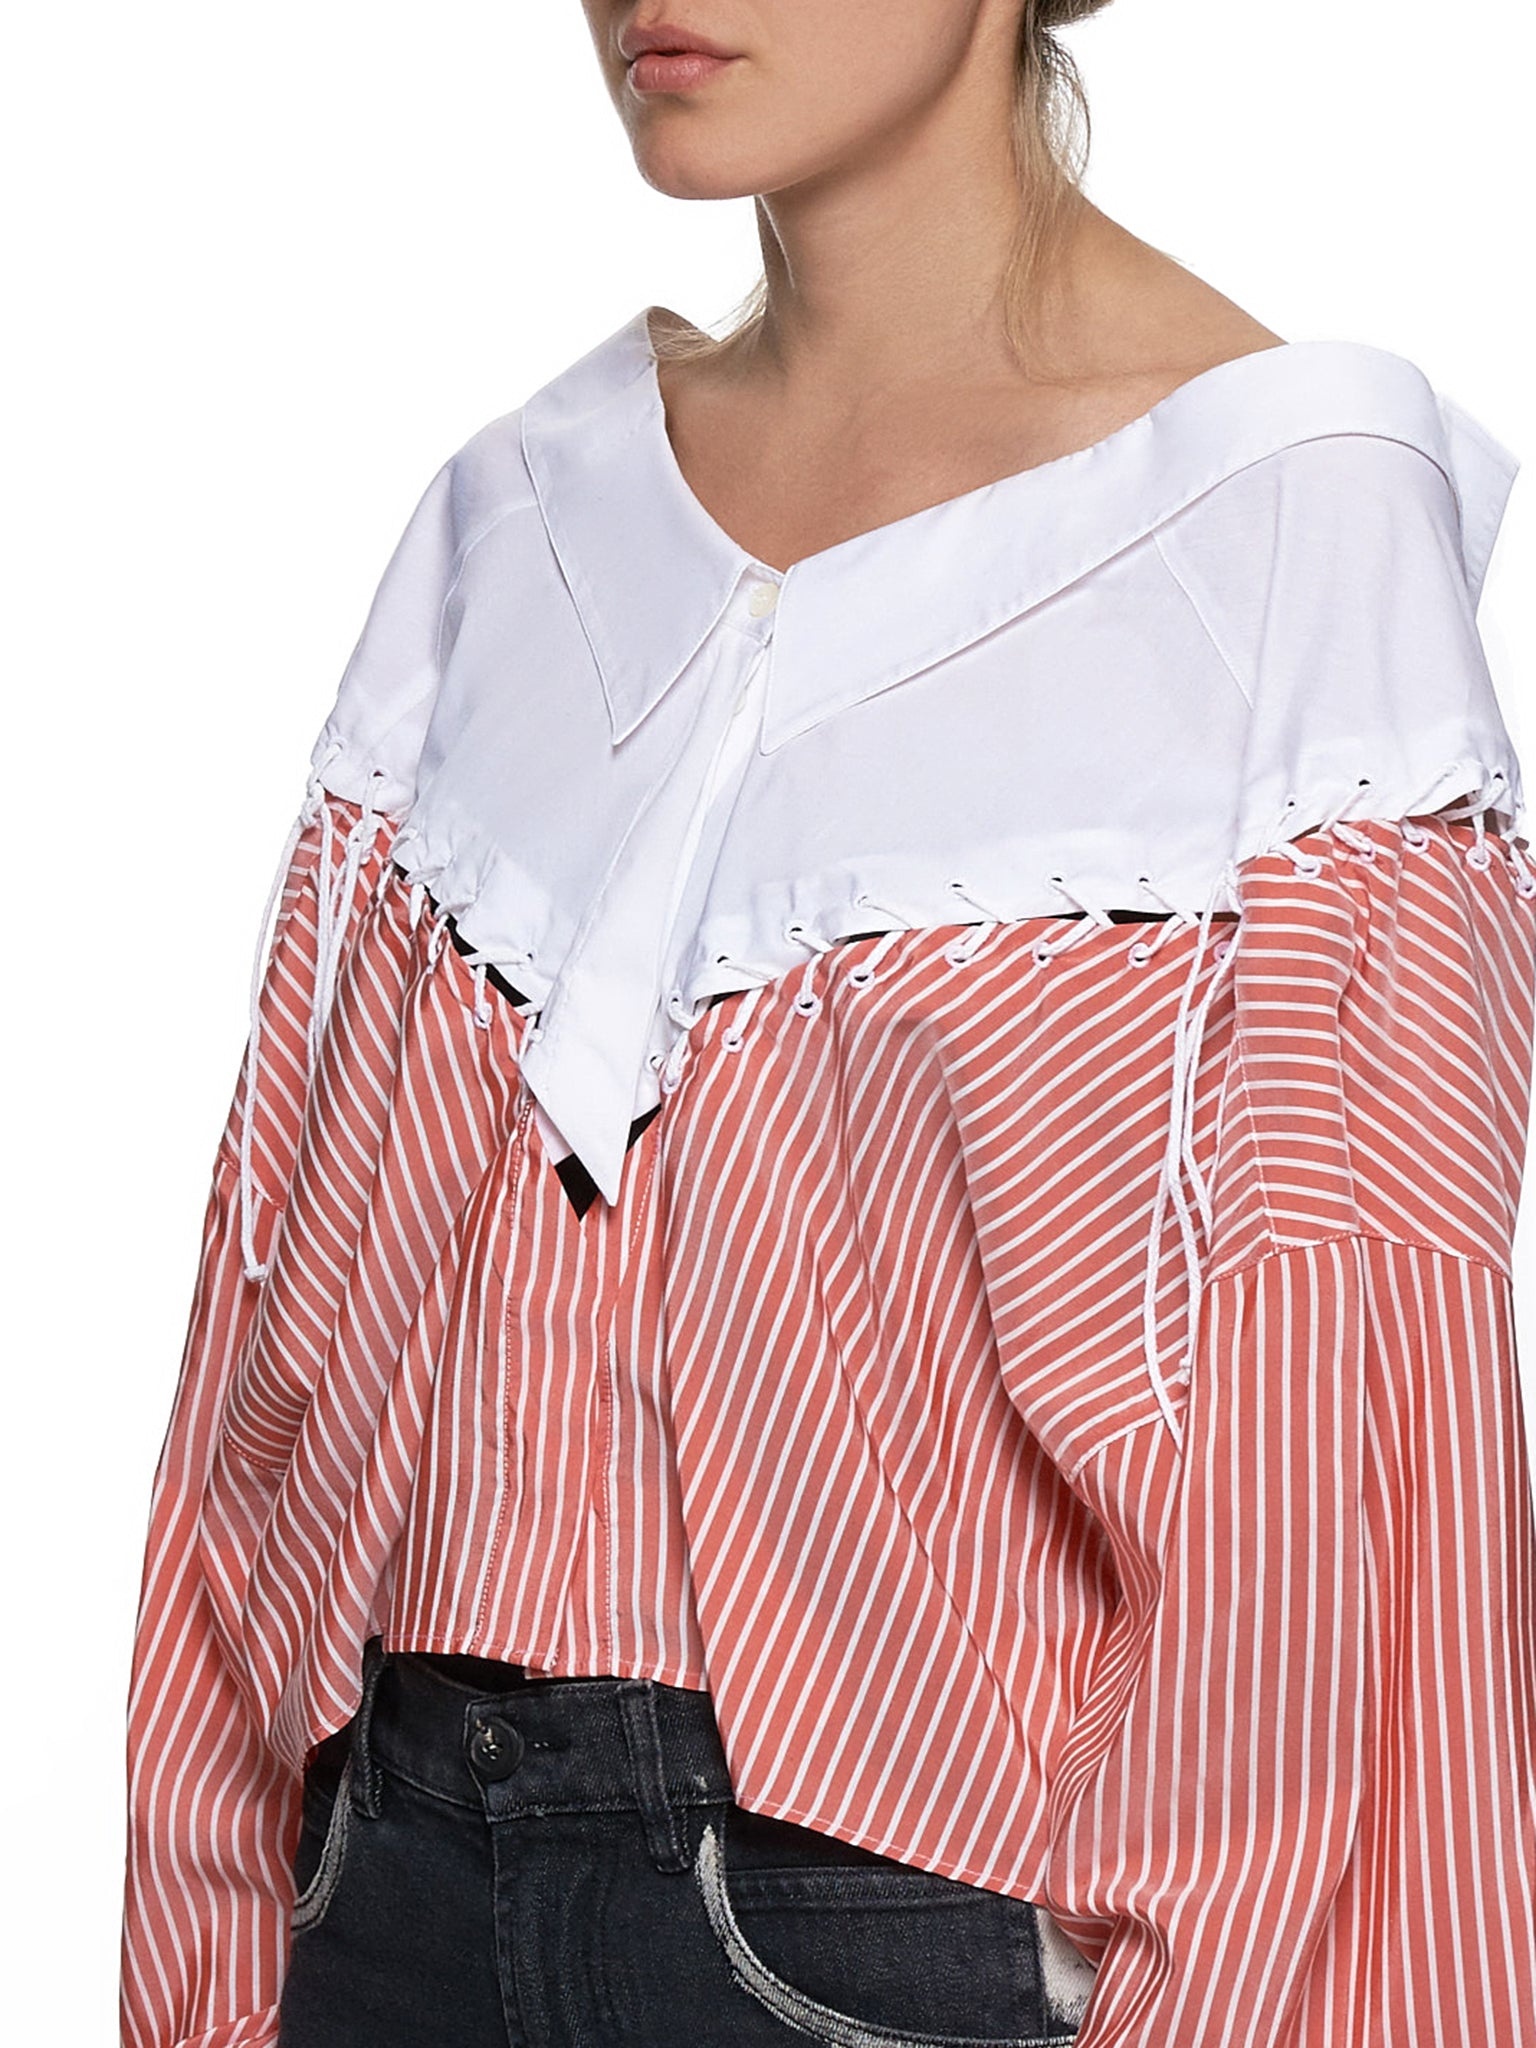 Lace Up Stripe Top - 4